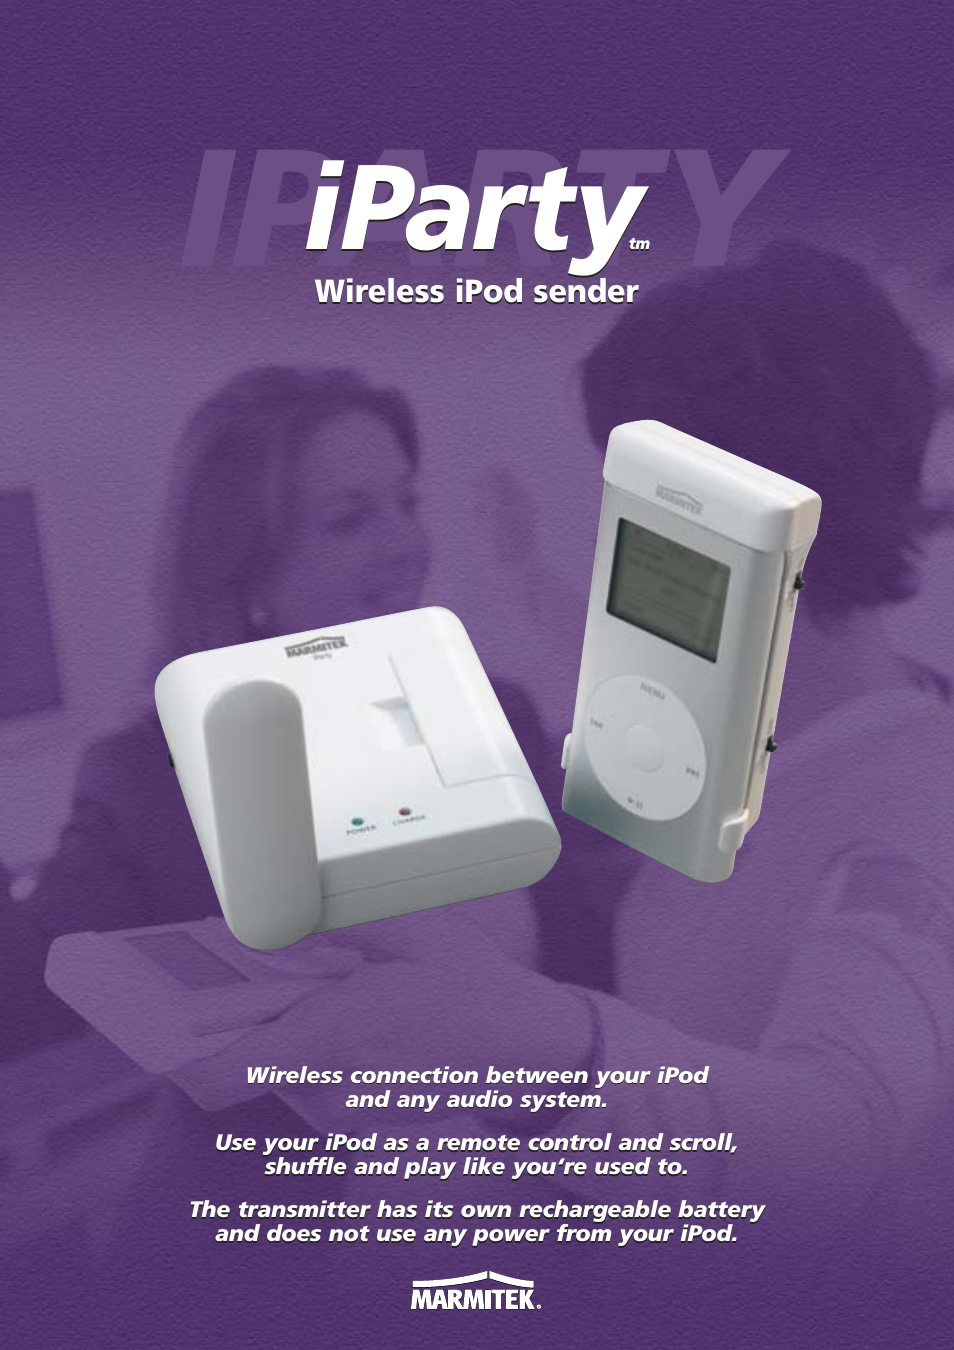 Wireless iPod Sender iParty